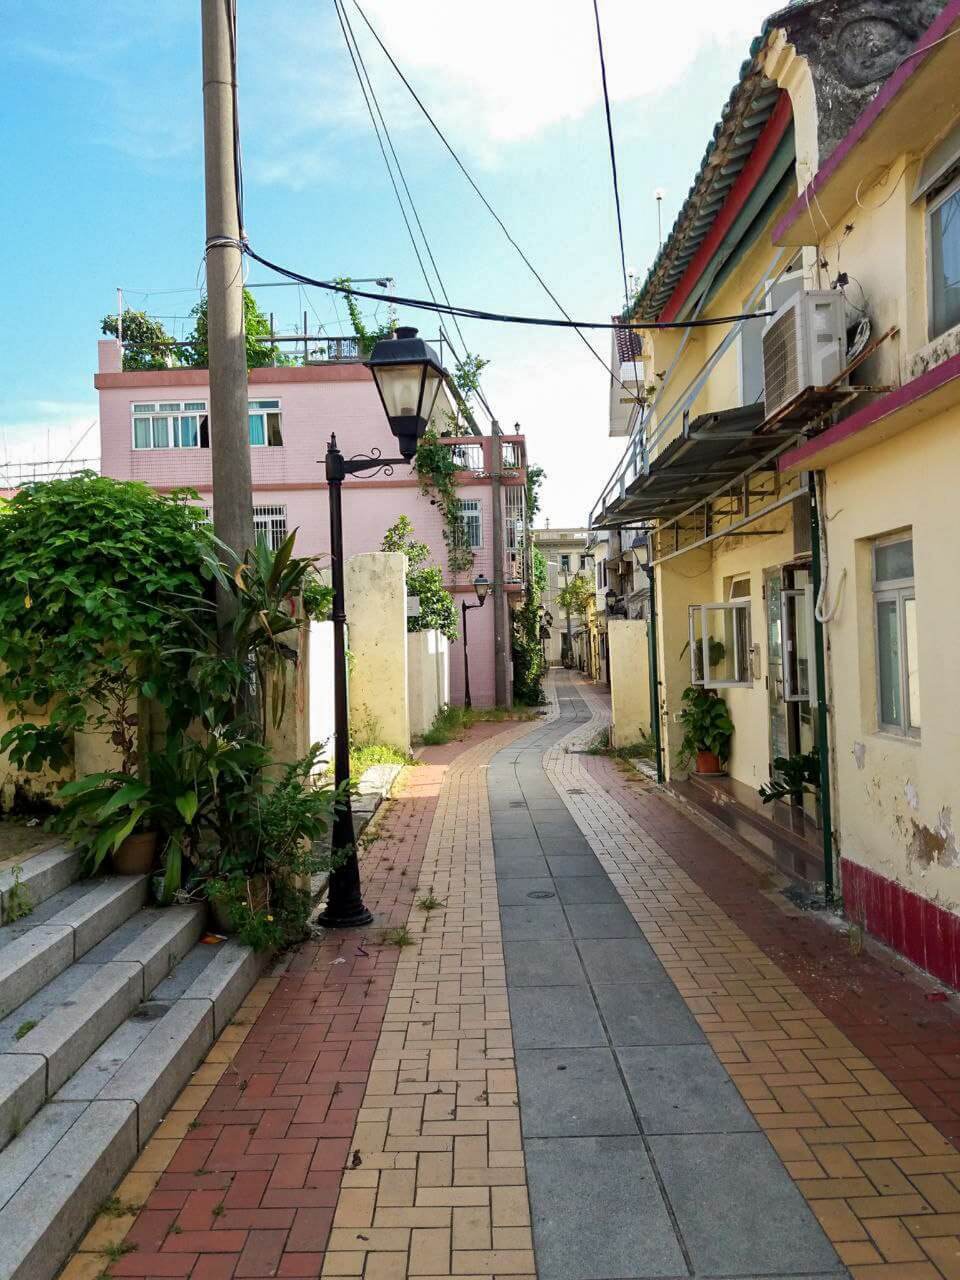 Coloane Village is one of the underrated Macau tourist spots